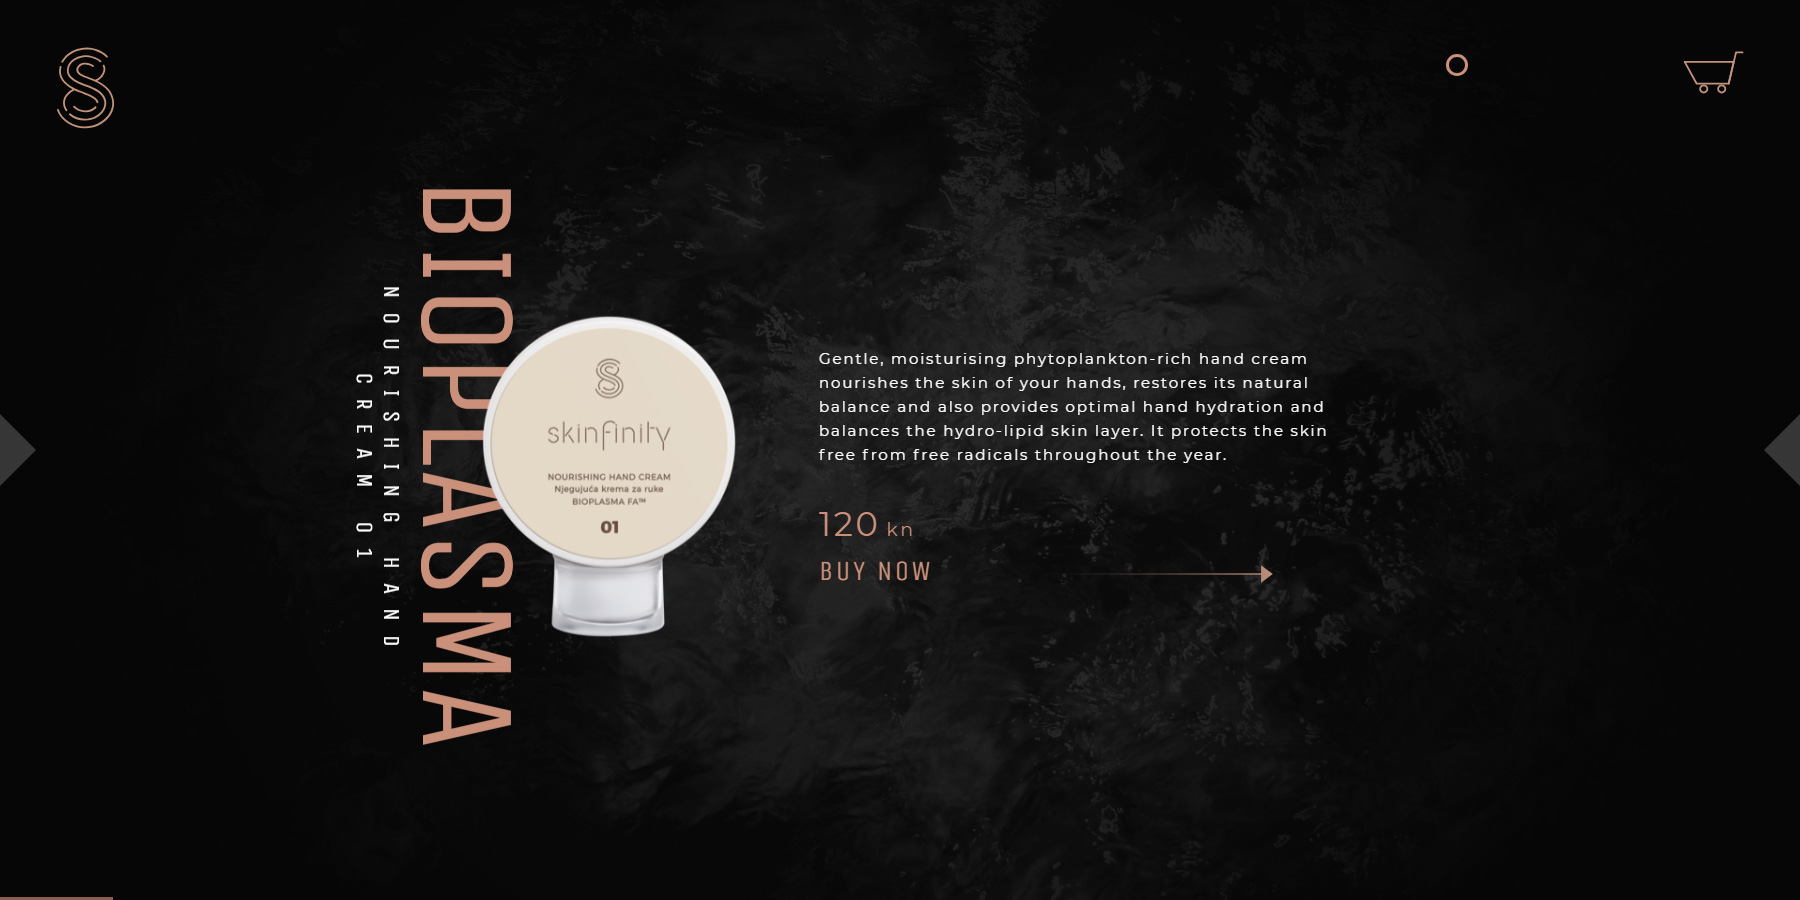 Skinfinity cosmetics - Website of the Day